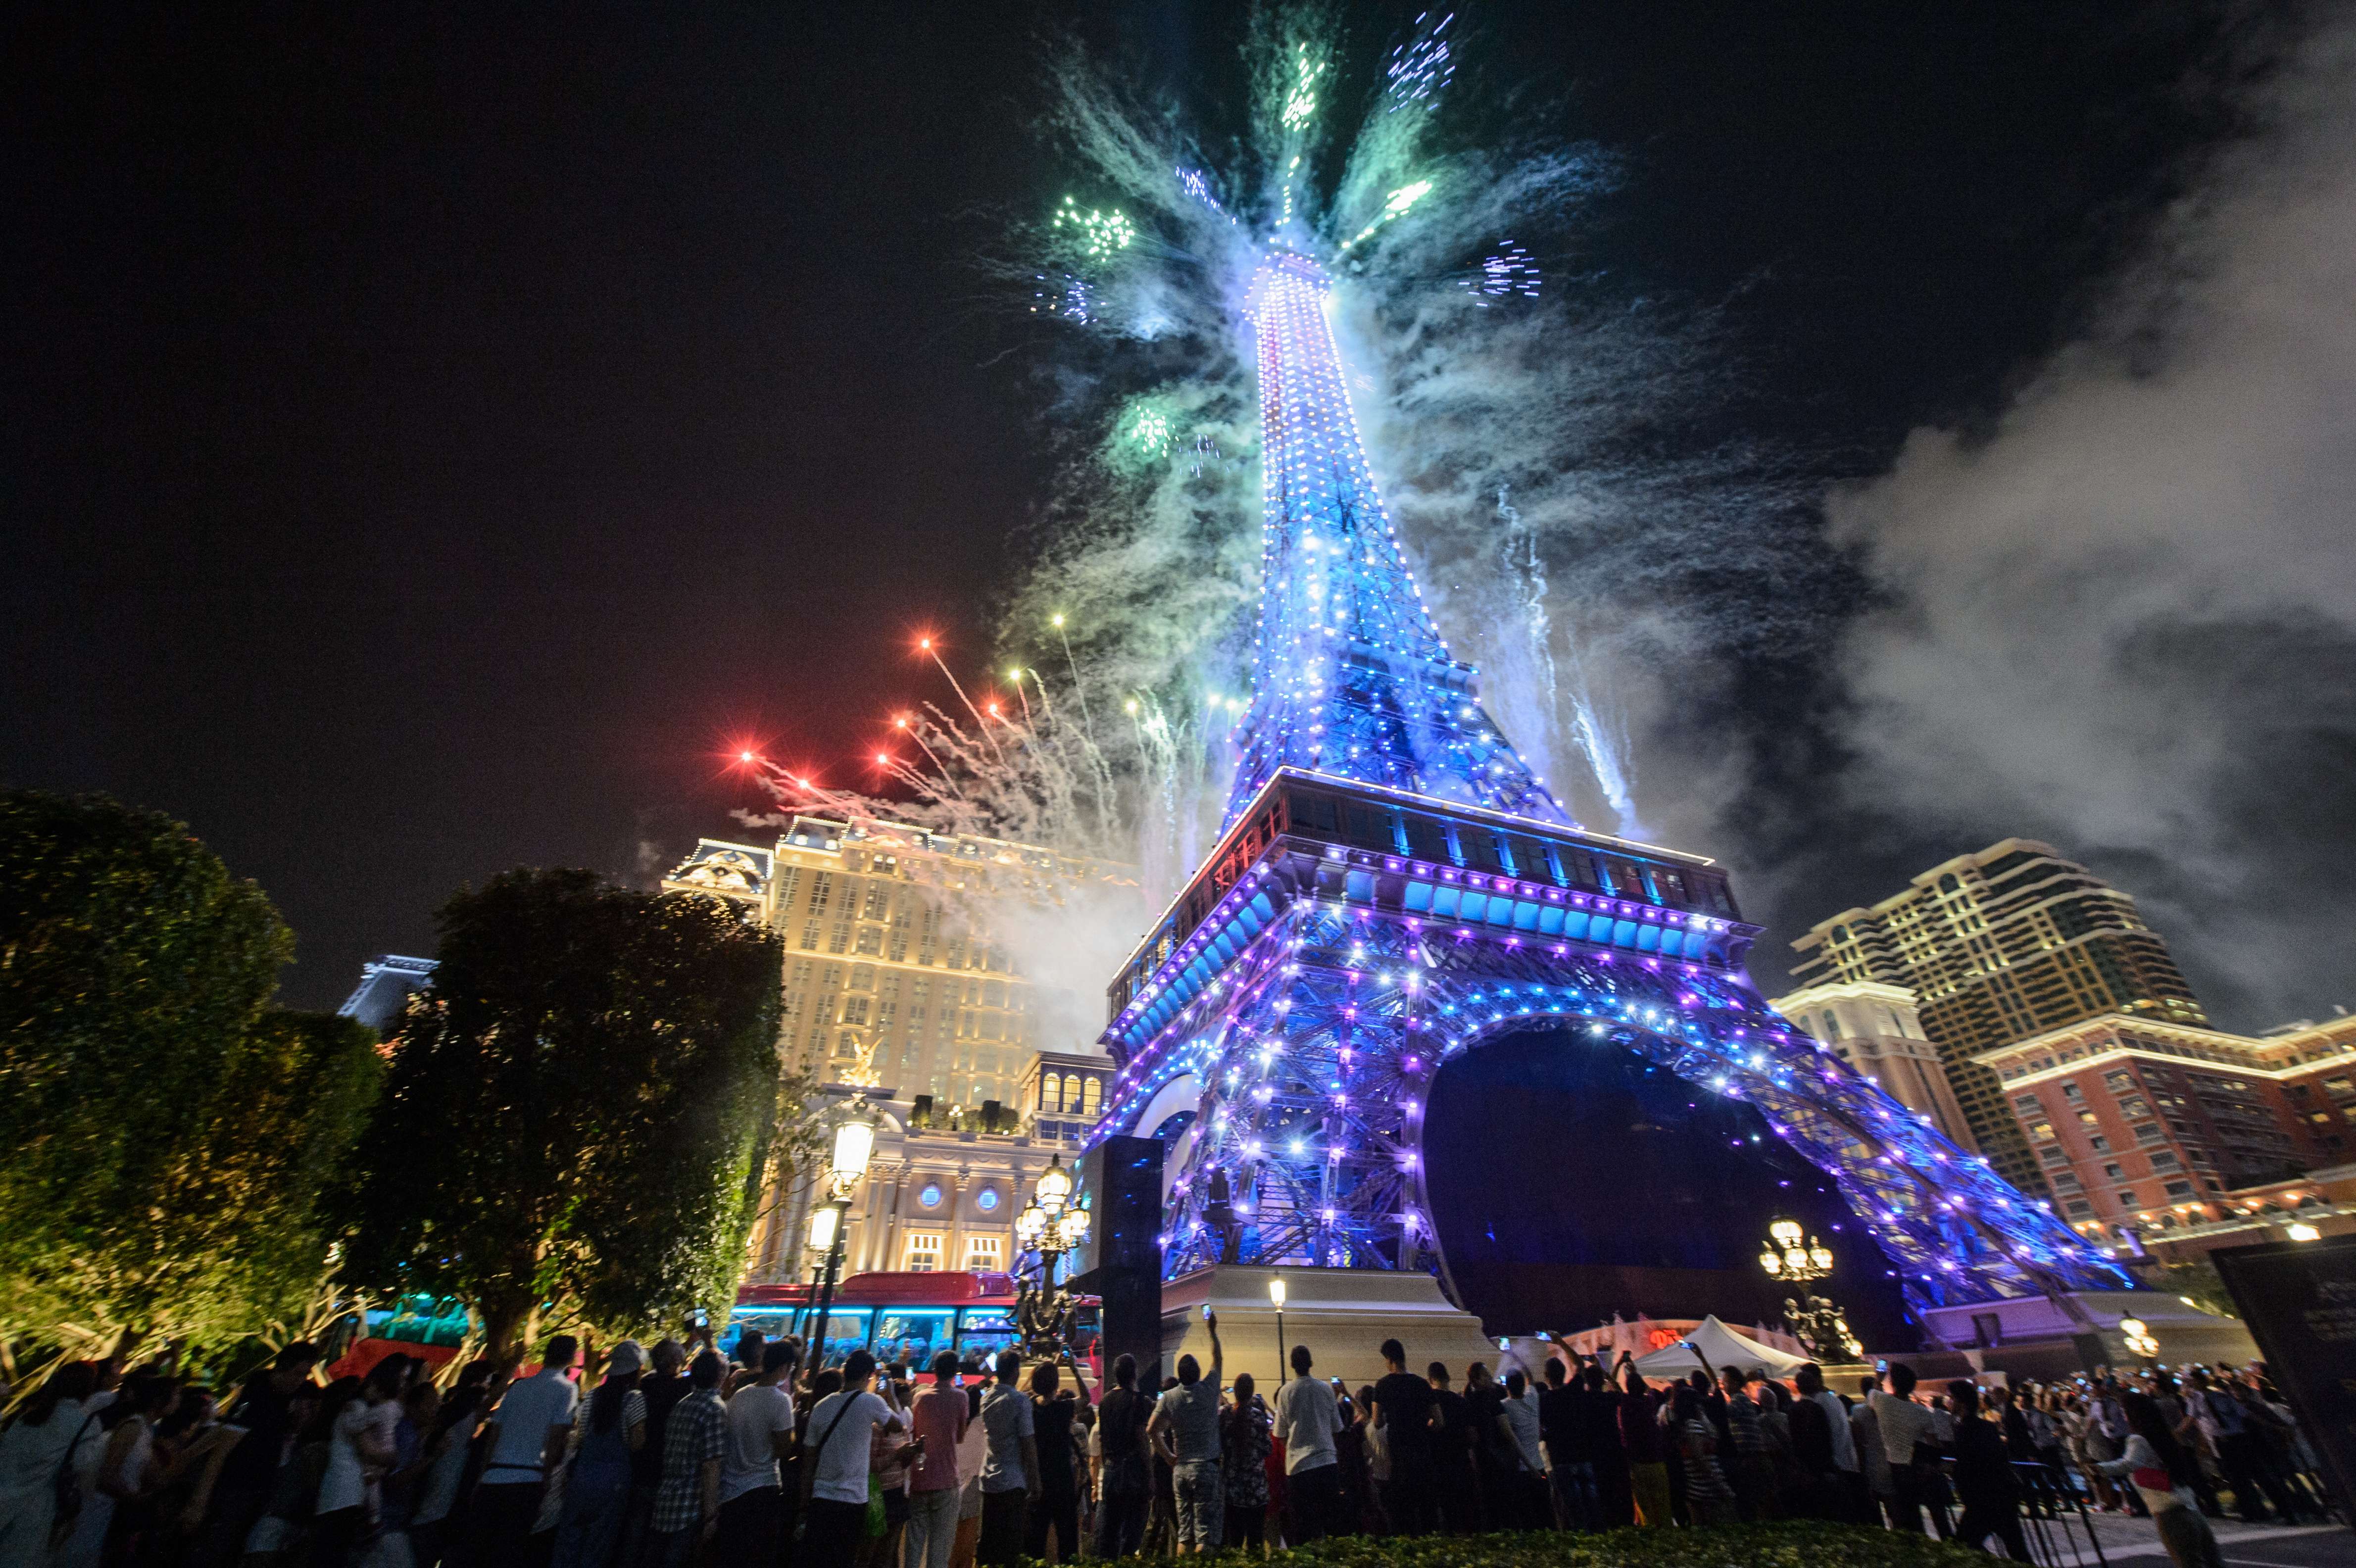 People gather to watch fireworks exploding from a replica of the Eiffel Tower after the opening of the Sands new mega resort The Parisian in Macau, on September 13, 2016. Photo: AFP